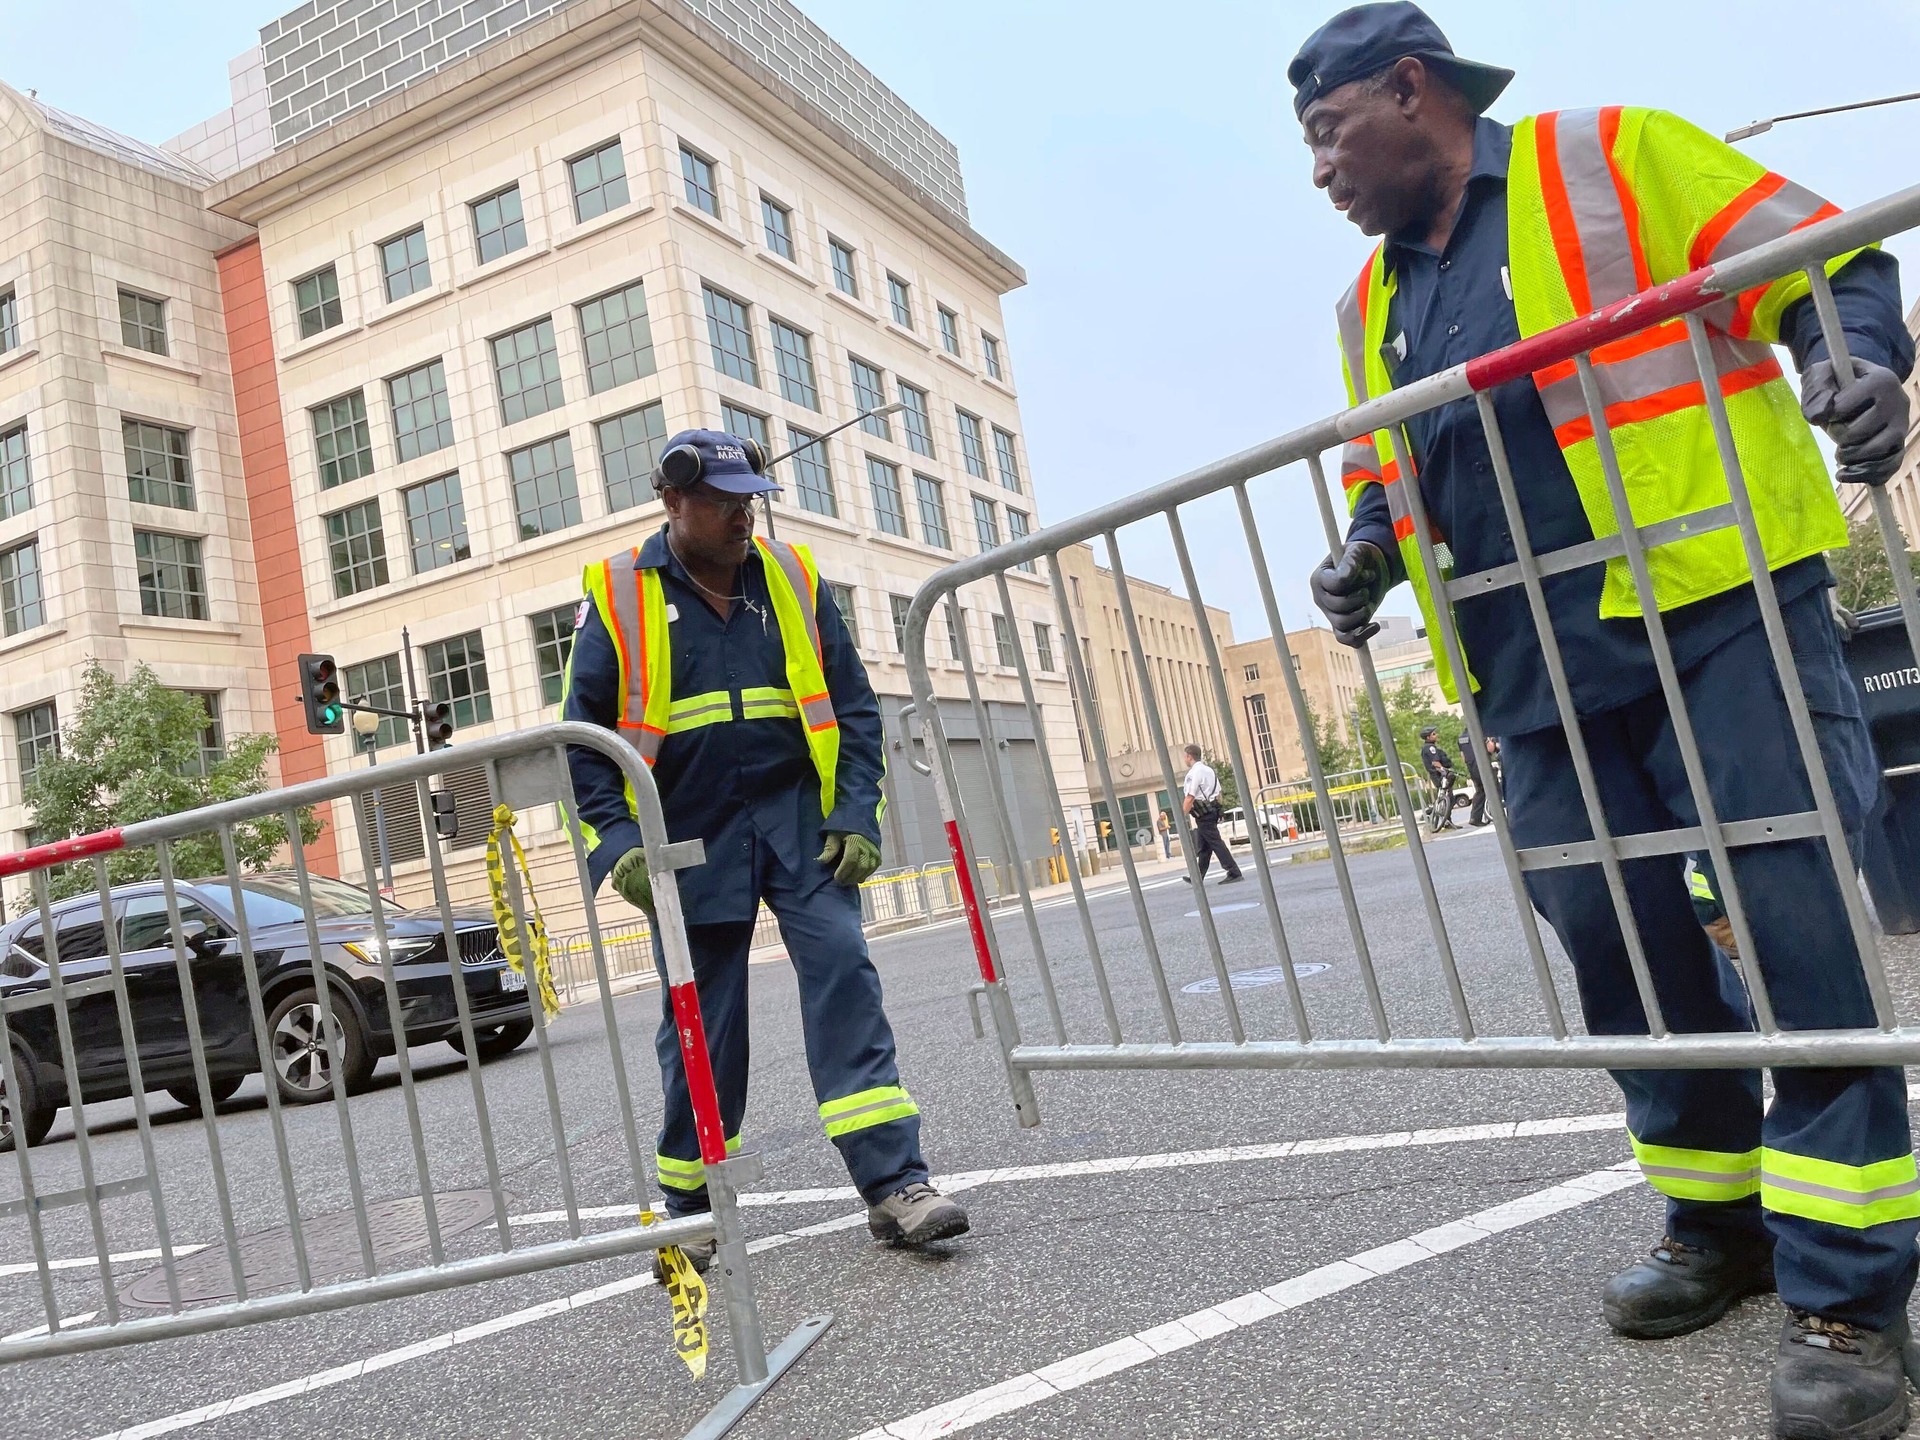 Workers placed barricades around the area of the courthouse ahead of the former president’s arrival.